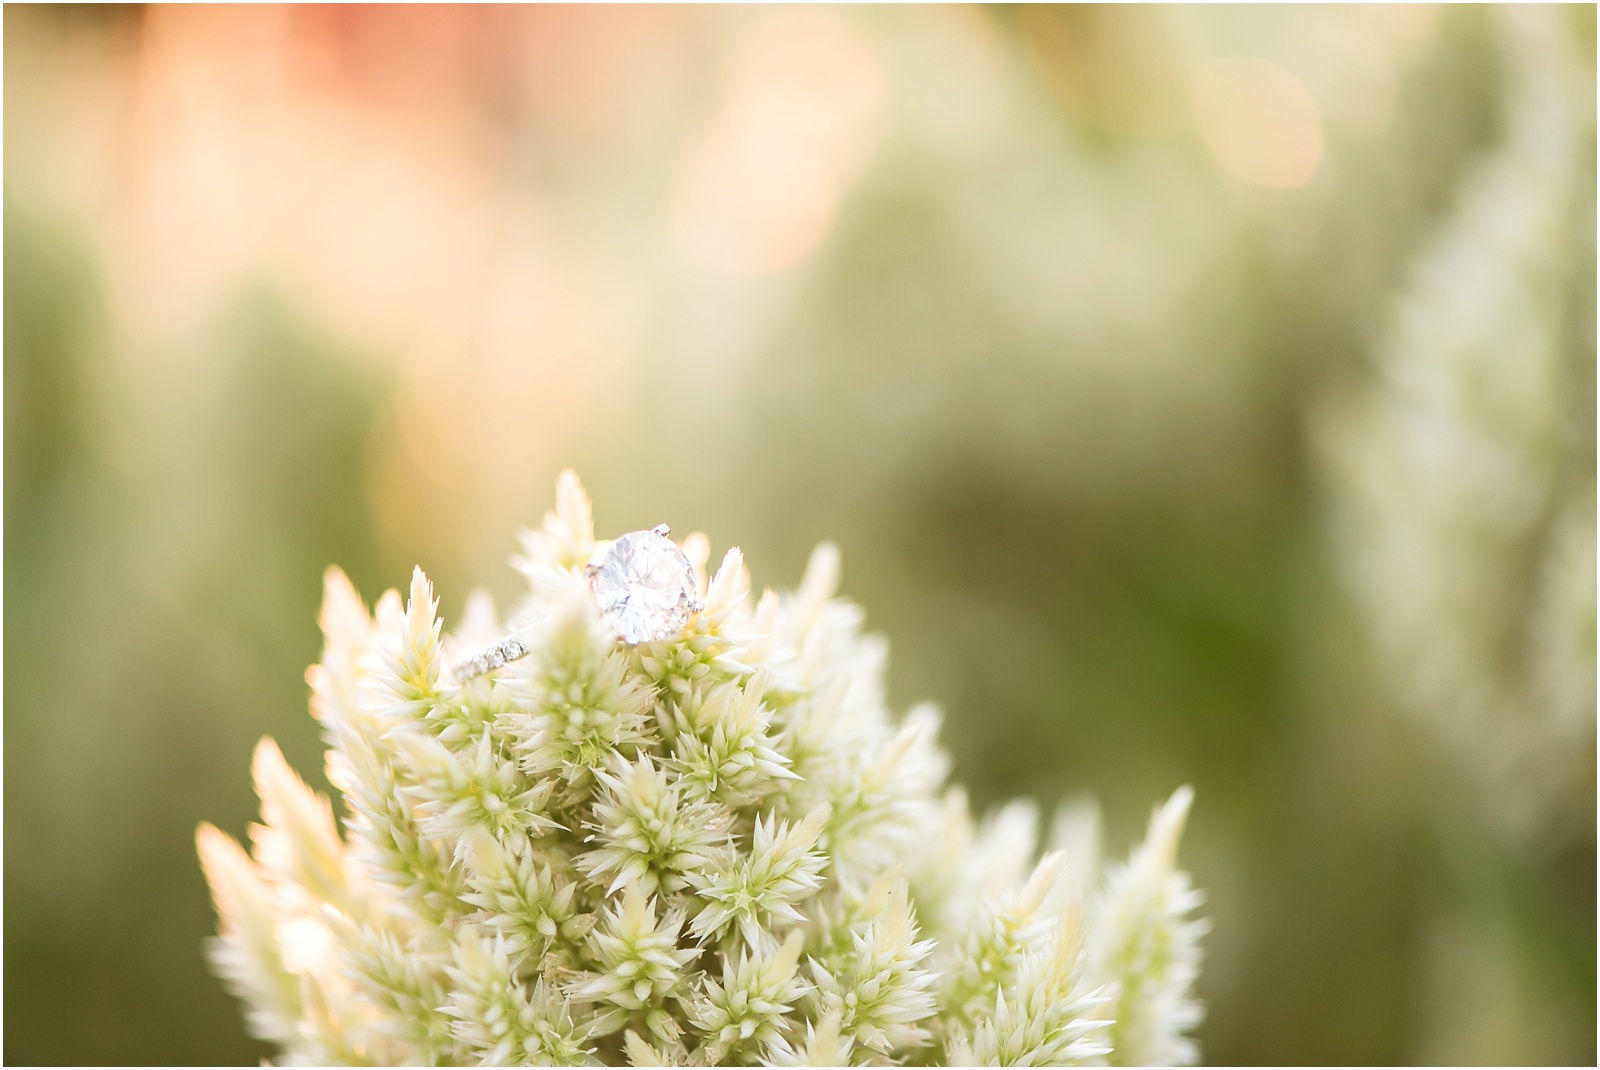 an engagement ring sitting on a white and green flower at JC Raulston Arboretum